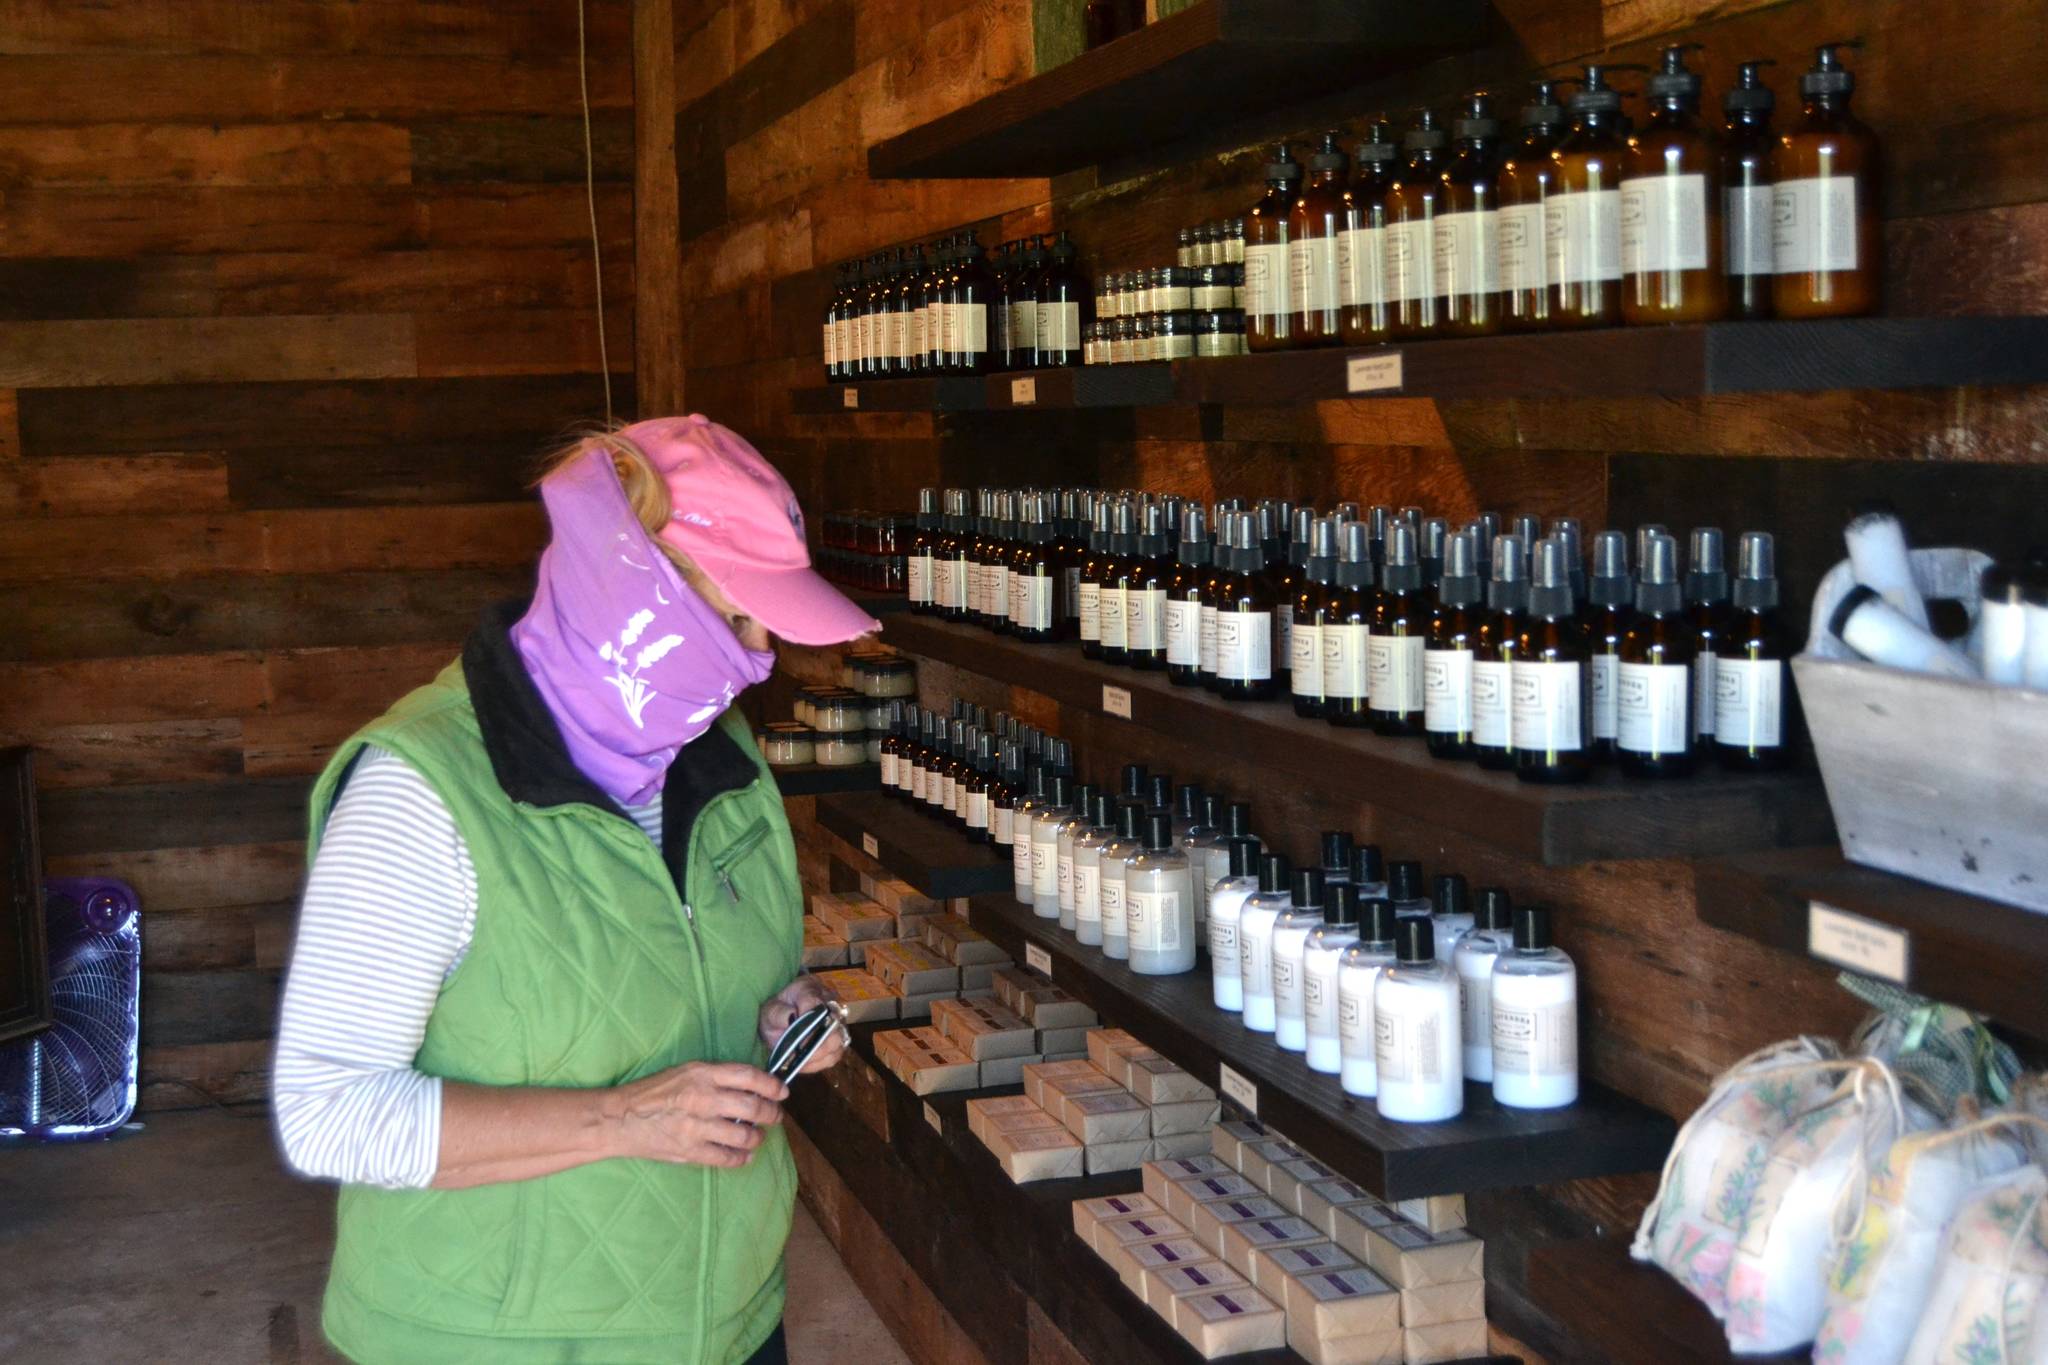 Shari Roland of Tacoma looks at some soaps during a visit to Lavender Connection’s gift shop. Lavender farms must require visitors and staff to wear masks inside buildings and recommend them in lavender fields, Clallam County health officials say. Sequim Gazette photo by Matthew Nash